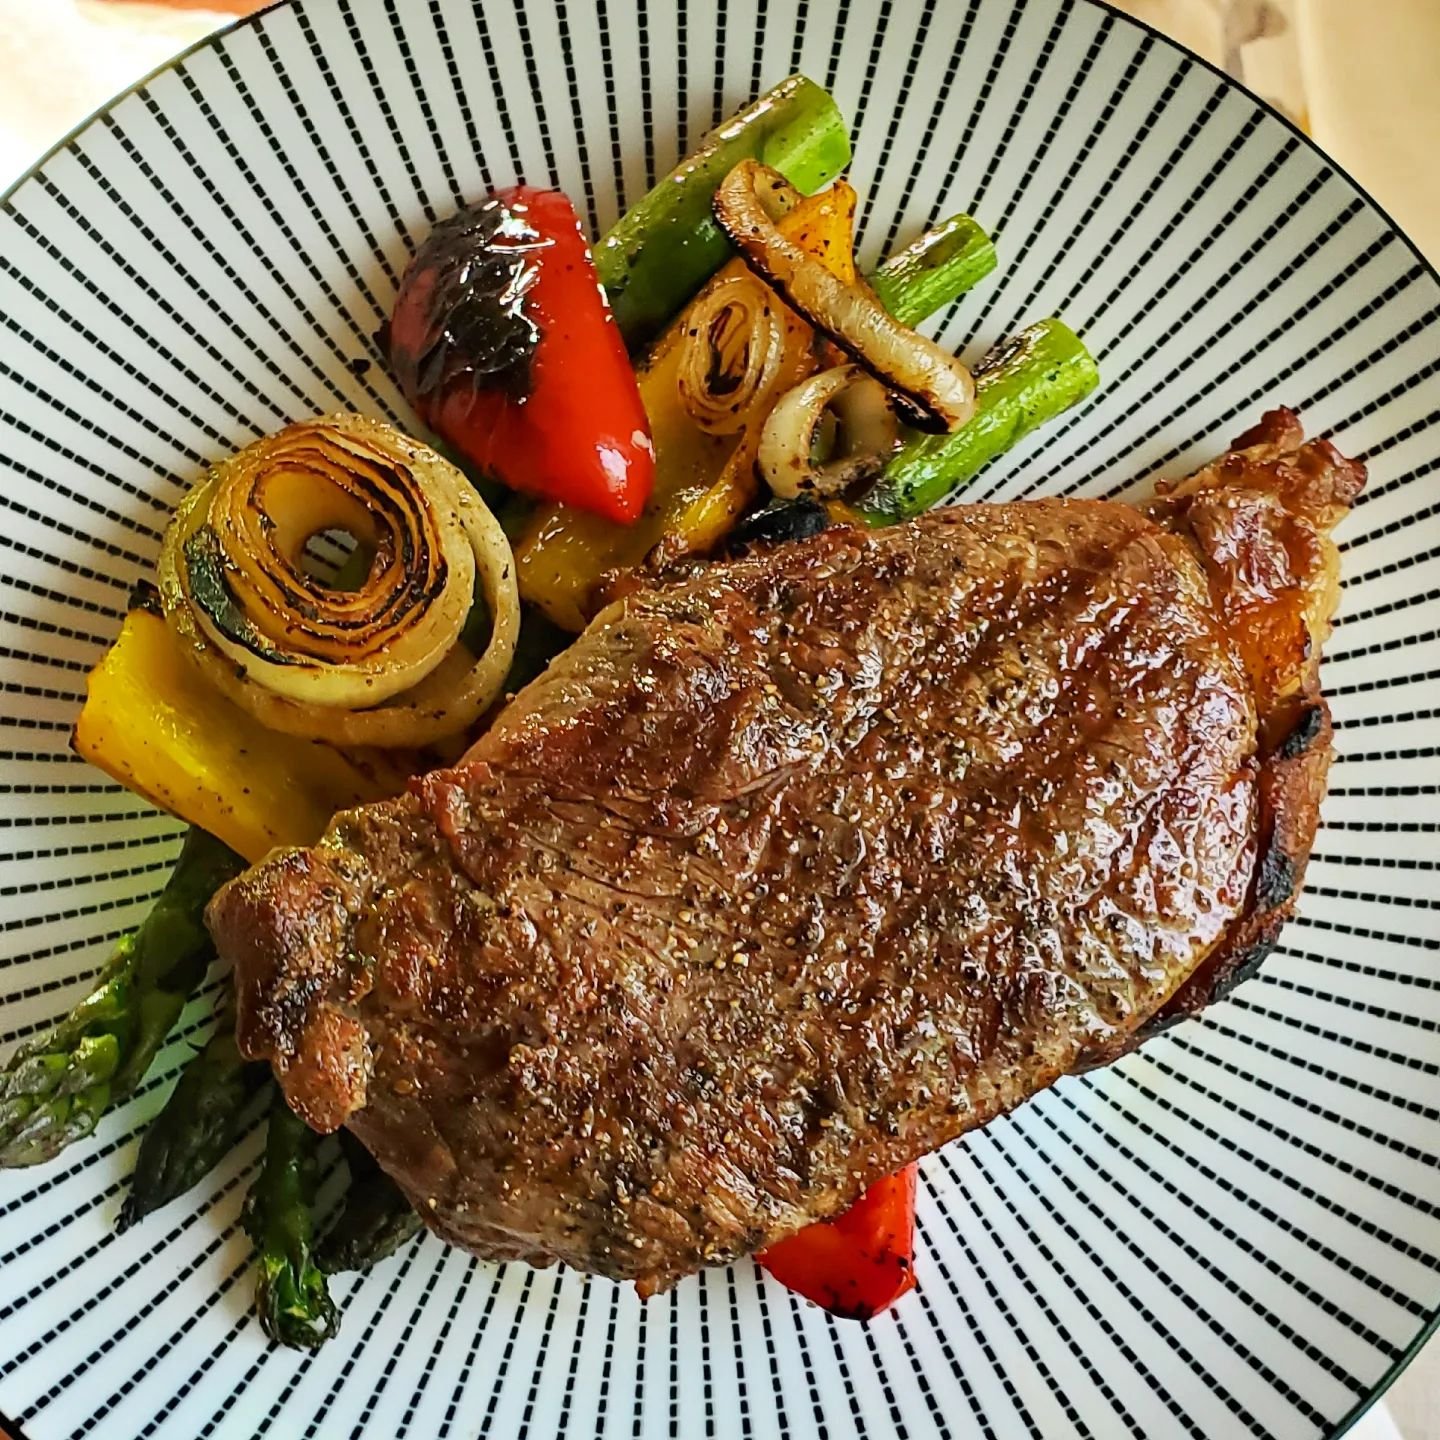 Kicking off the long weekend by enjoying a farm market dinner tonight - one of our Grass-fed Striploin Steaks - packaged on Wednesday and never frozen, this is as fresh as it gets, folks! 🔥 
 
Alongside some grilled @sparrowgrass_farm organic aspara